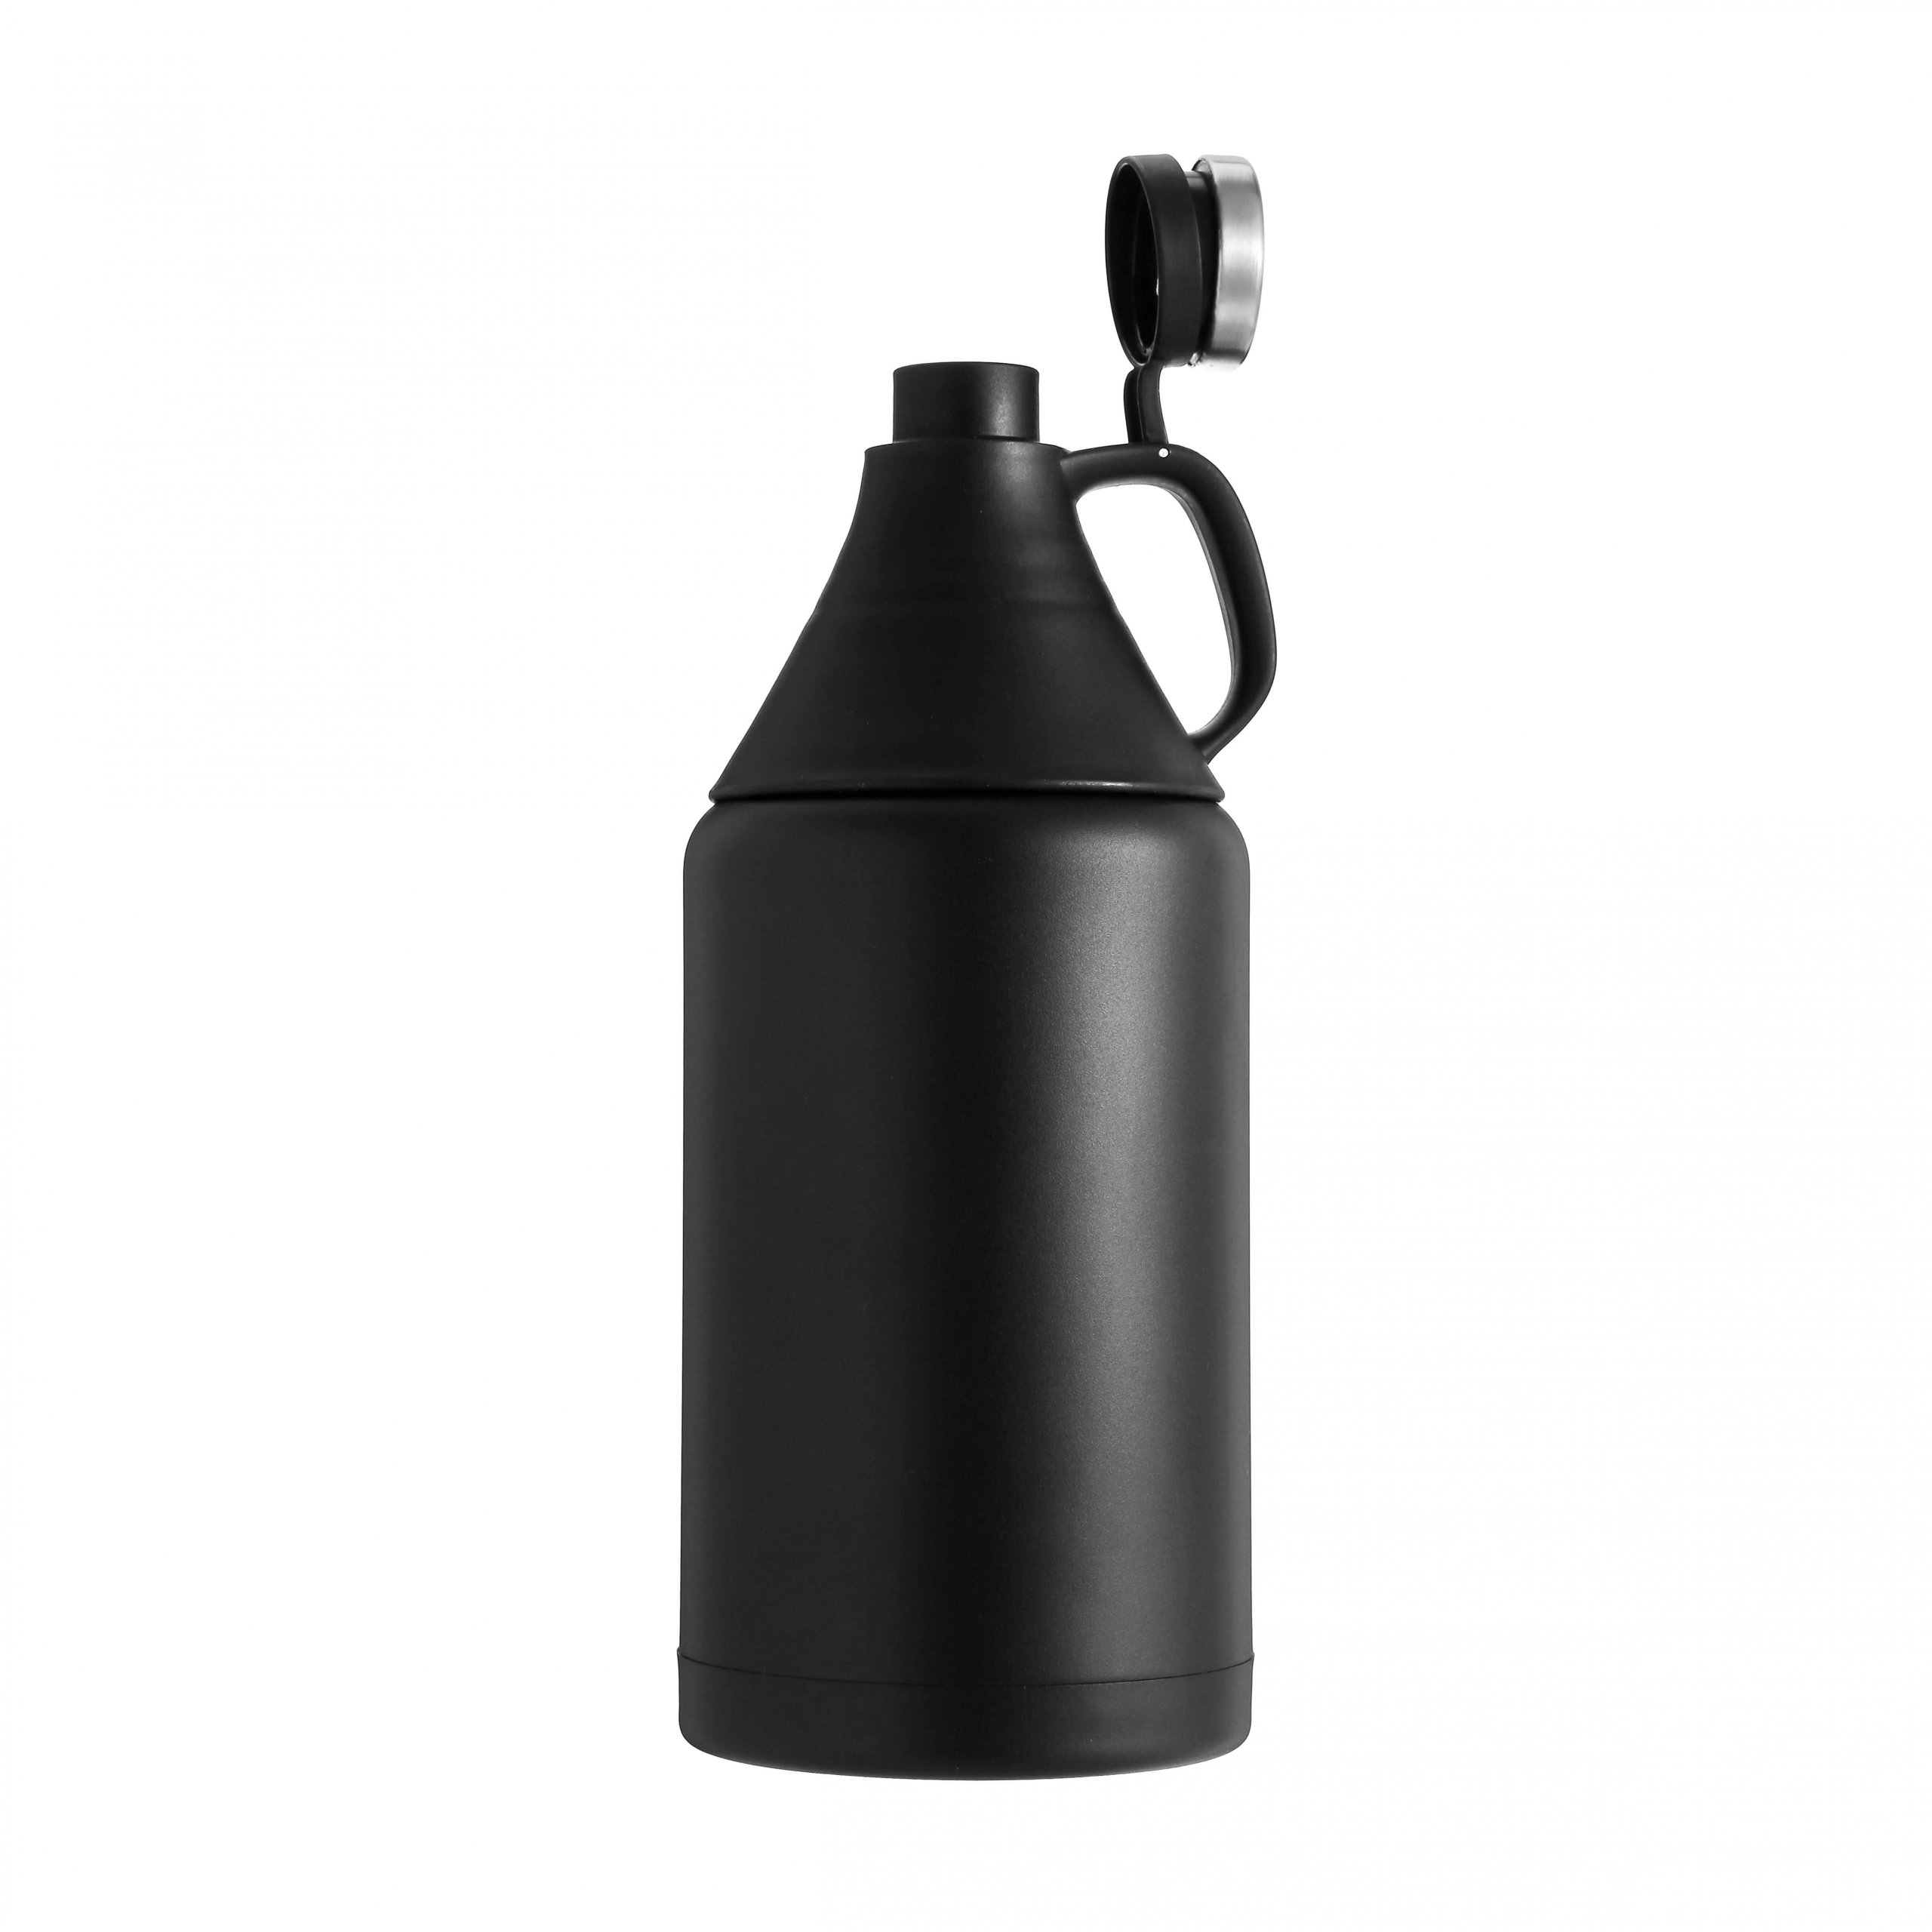 Stainless Steel Water Bottle Growler for Travel 64 Ounces and Tailgate Parties Juvale Beer Growler Camping Silver 